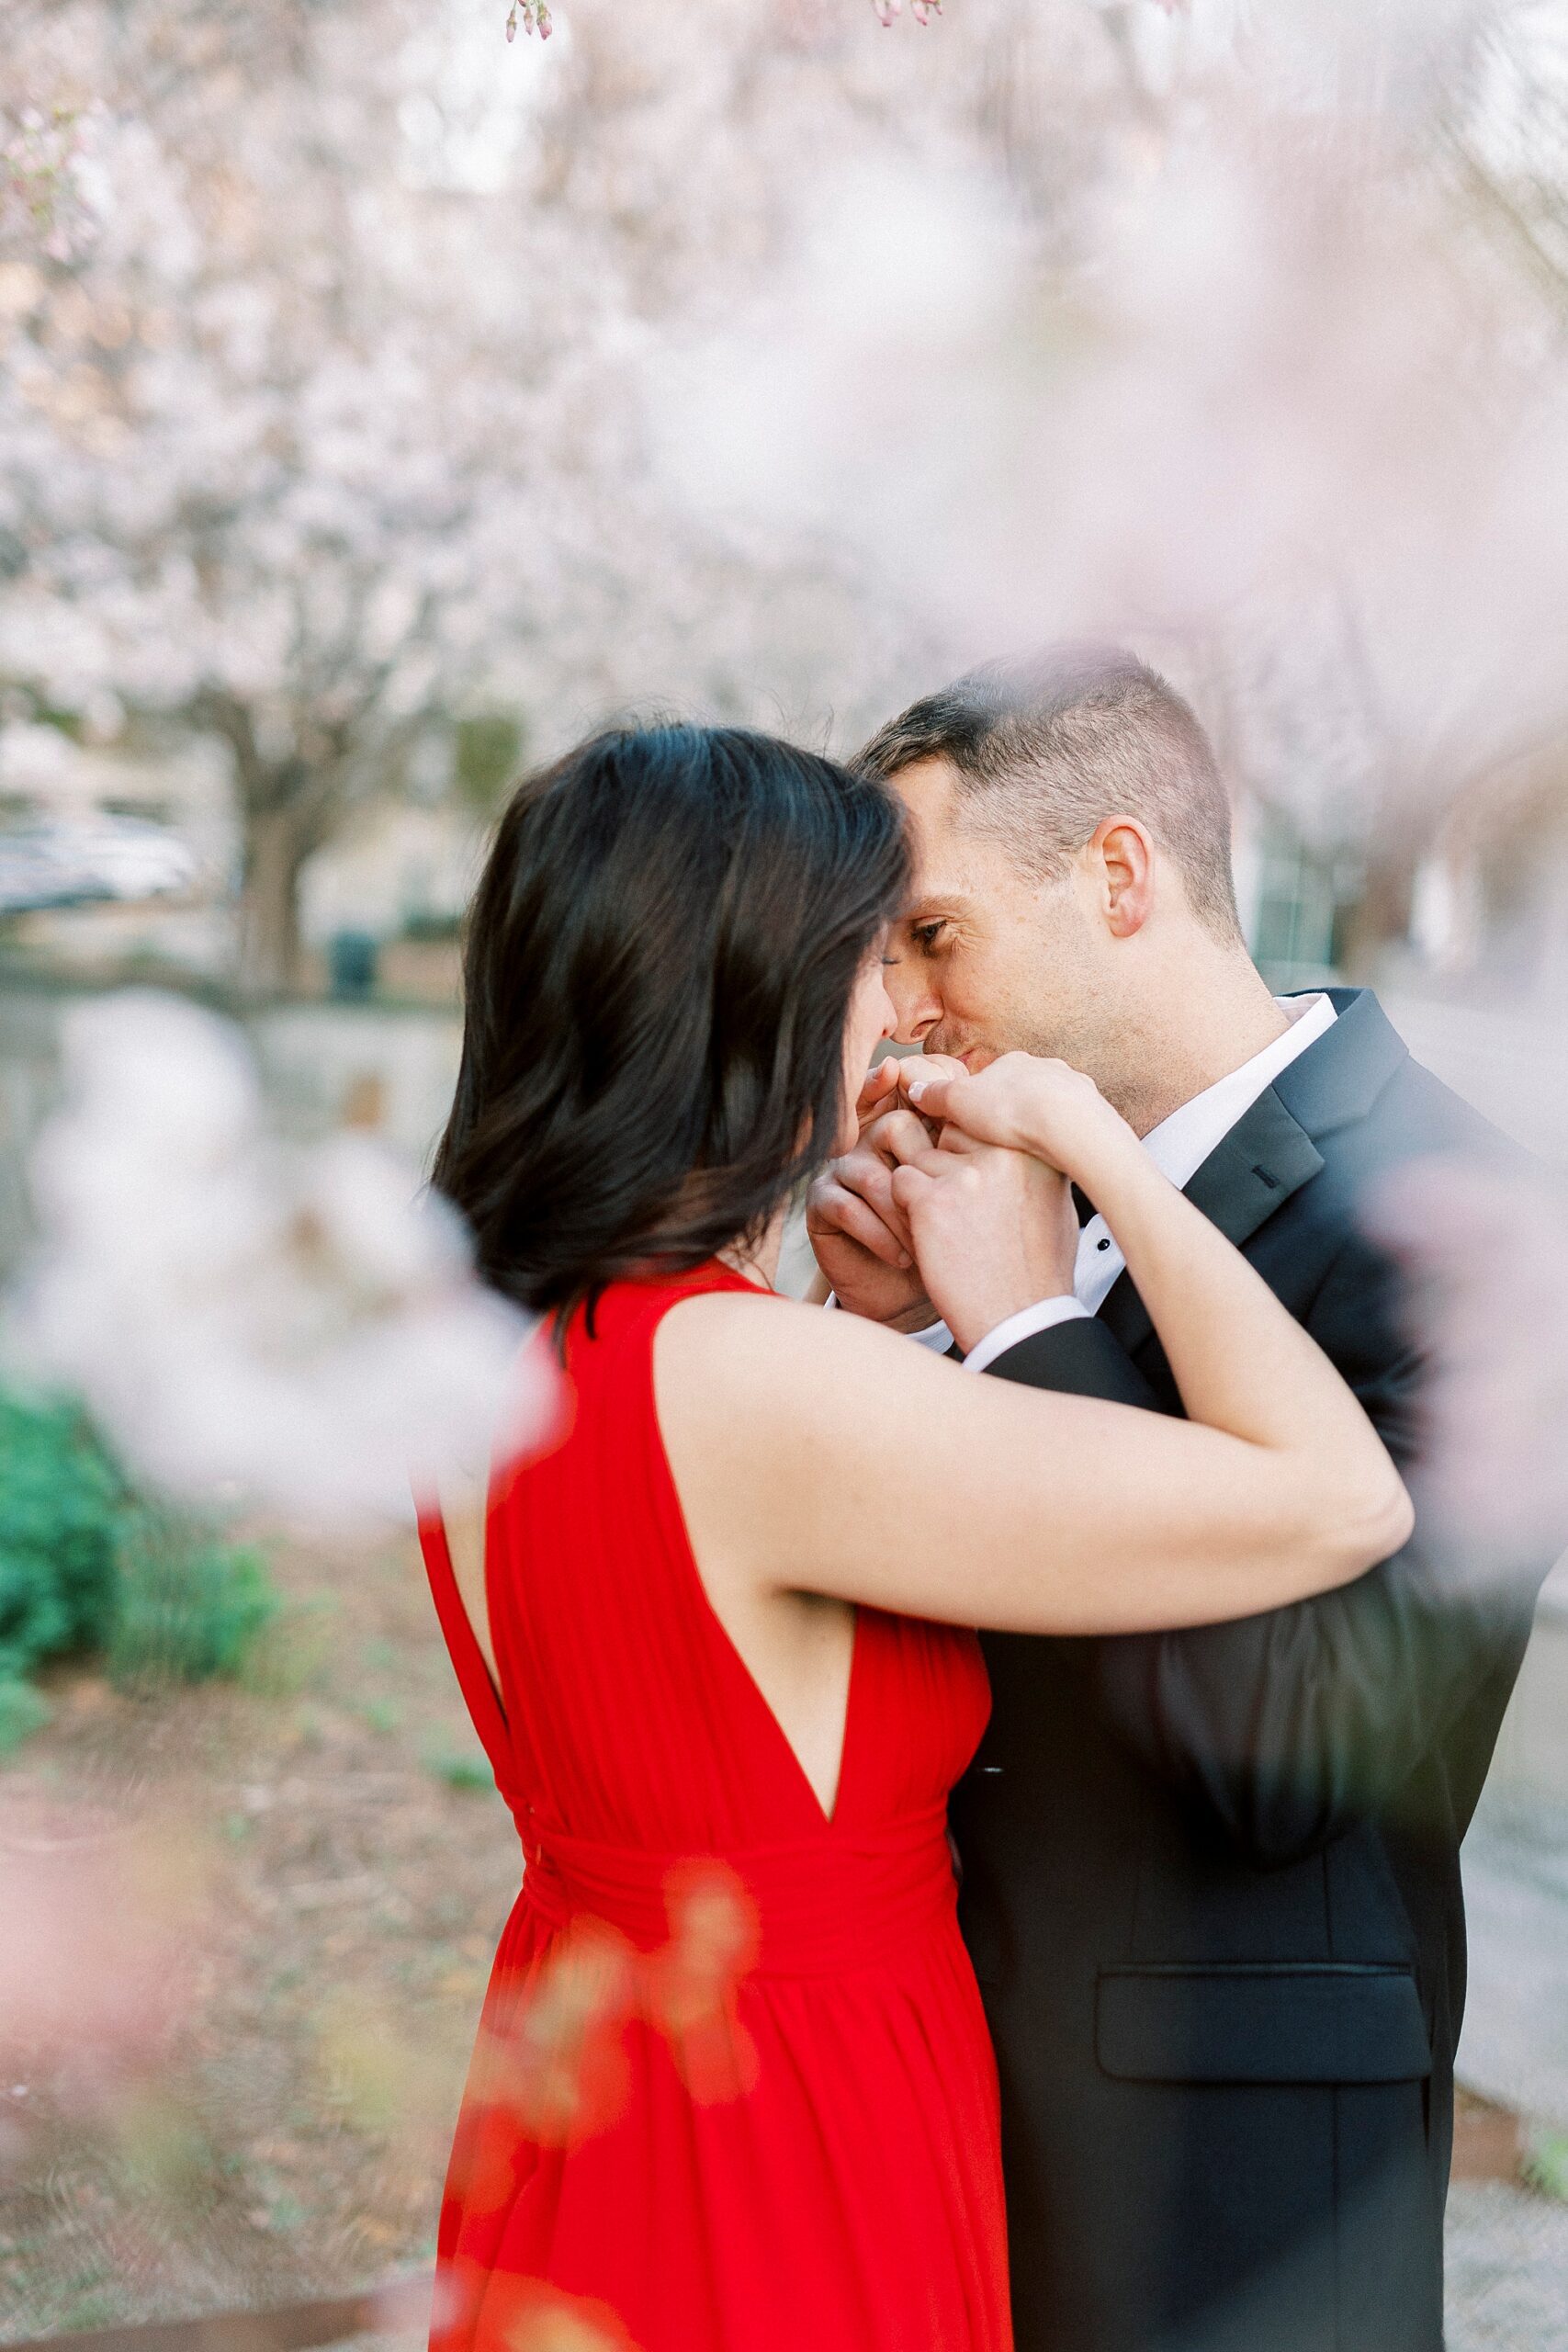 man kisses woman's hand during engagement session in Romare Bearden Park